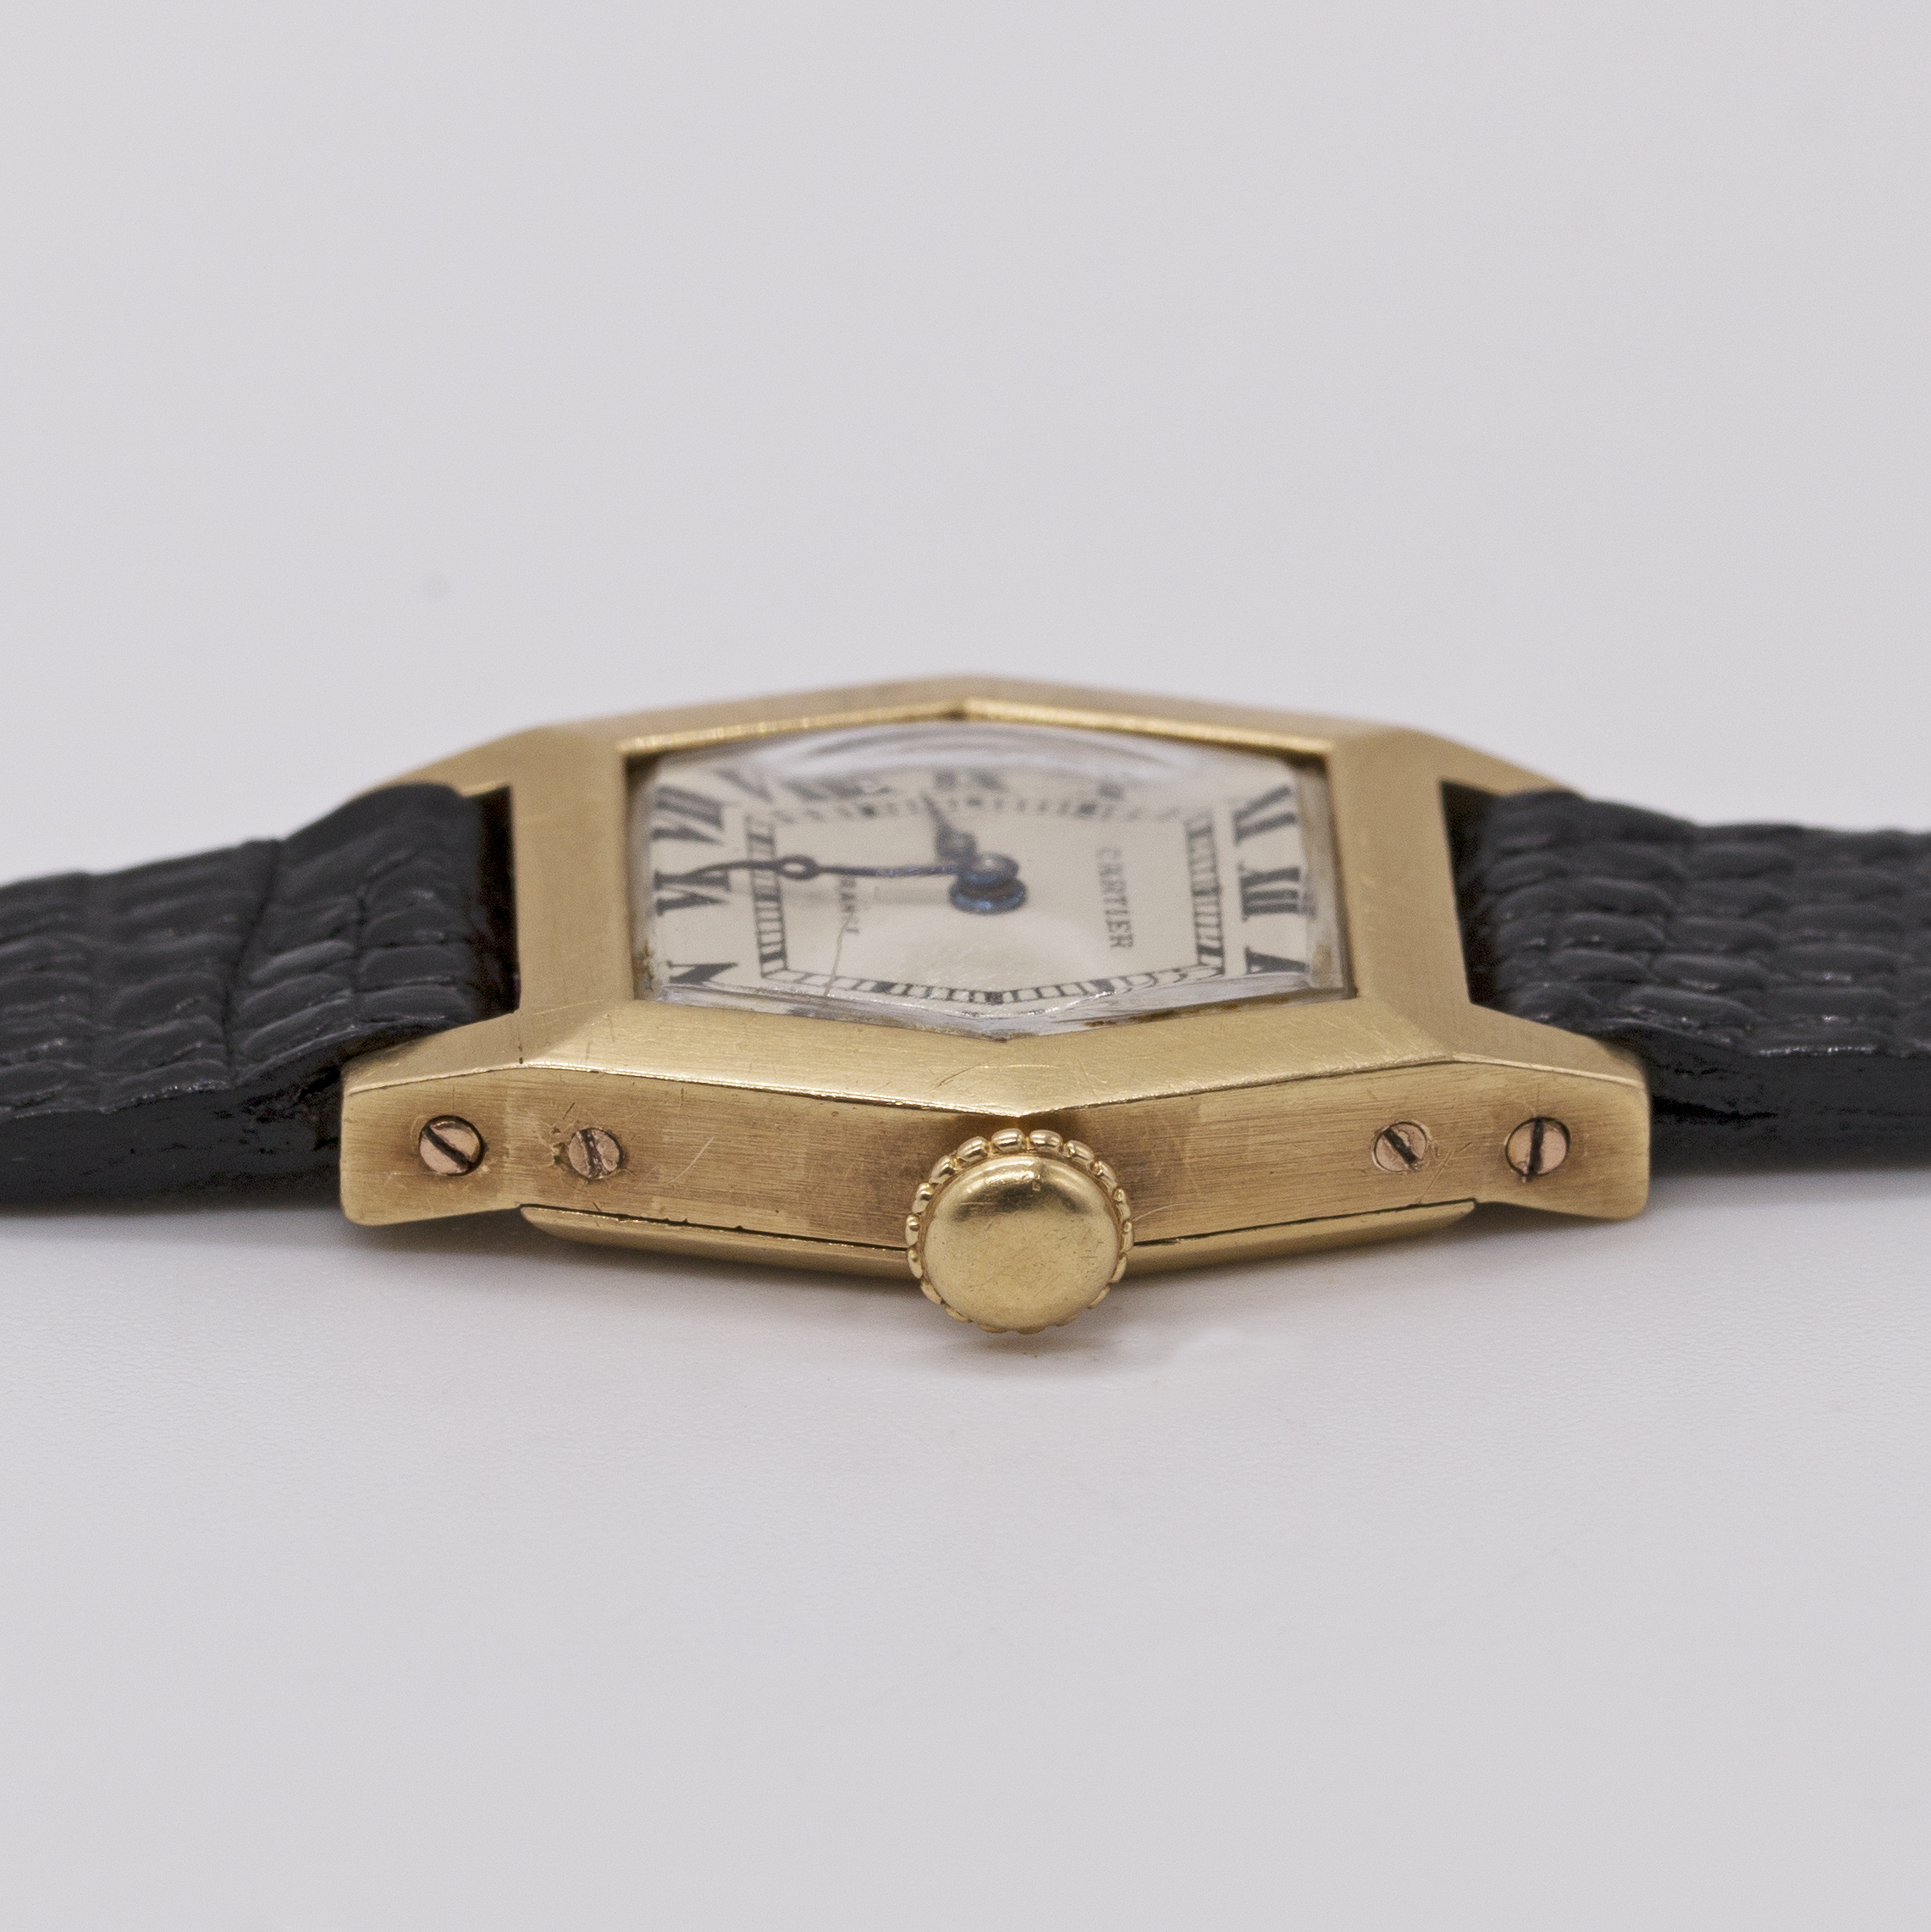 A RARE LADIES 18K SOLID GOLD CARTIER FRANCE WRIST WATCH CIRCA 1940 - Image 8 of 9